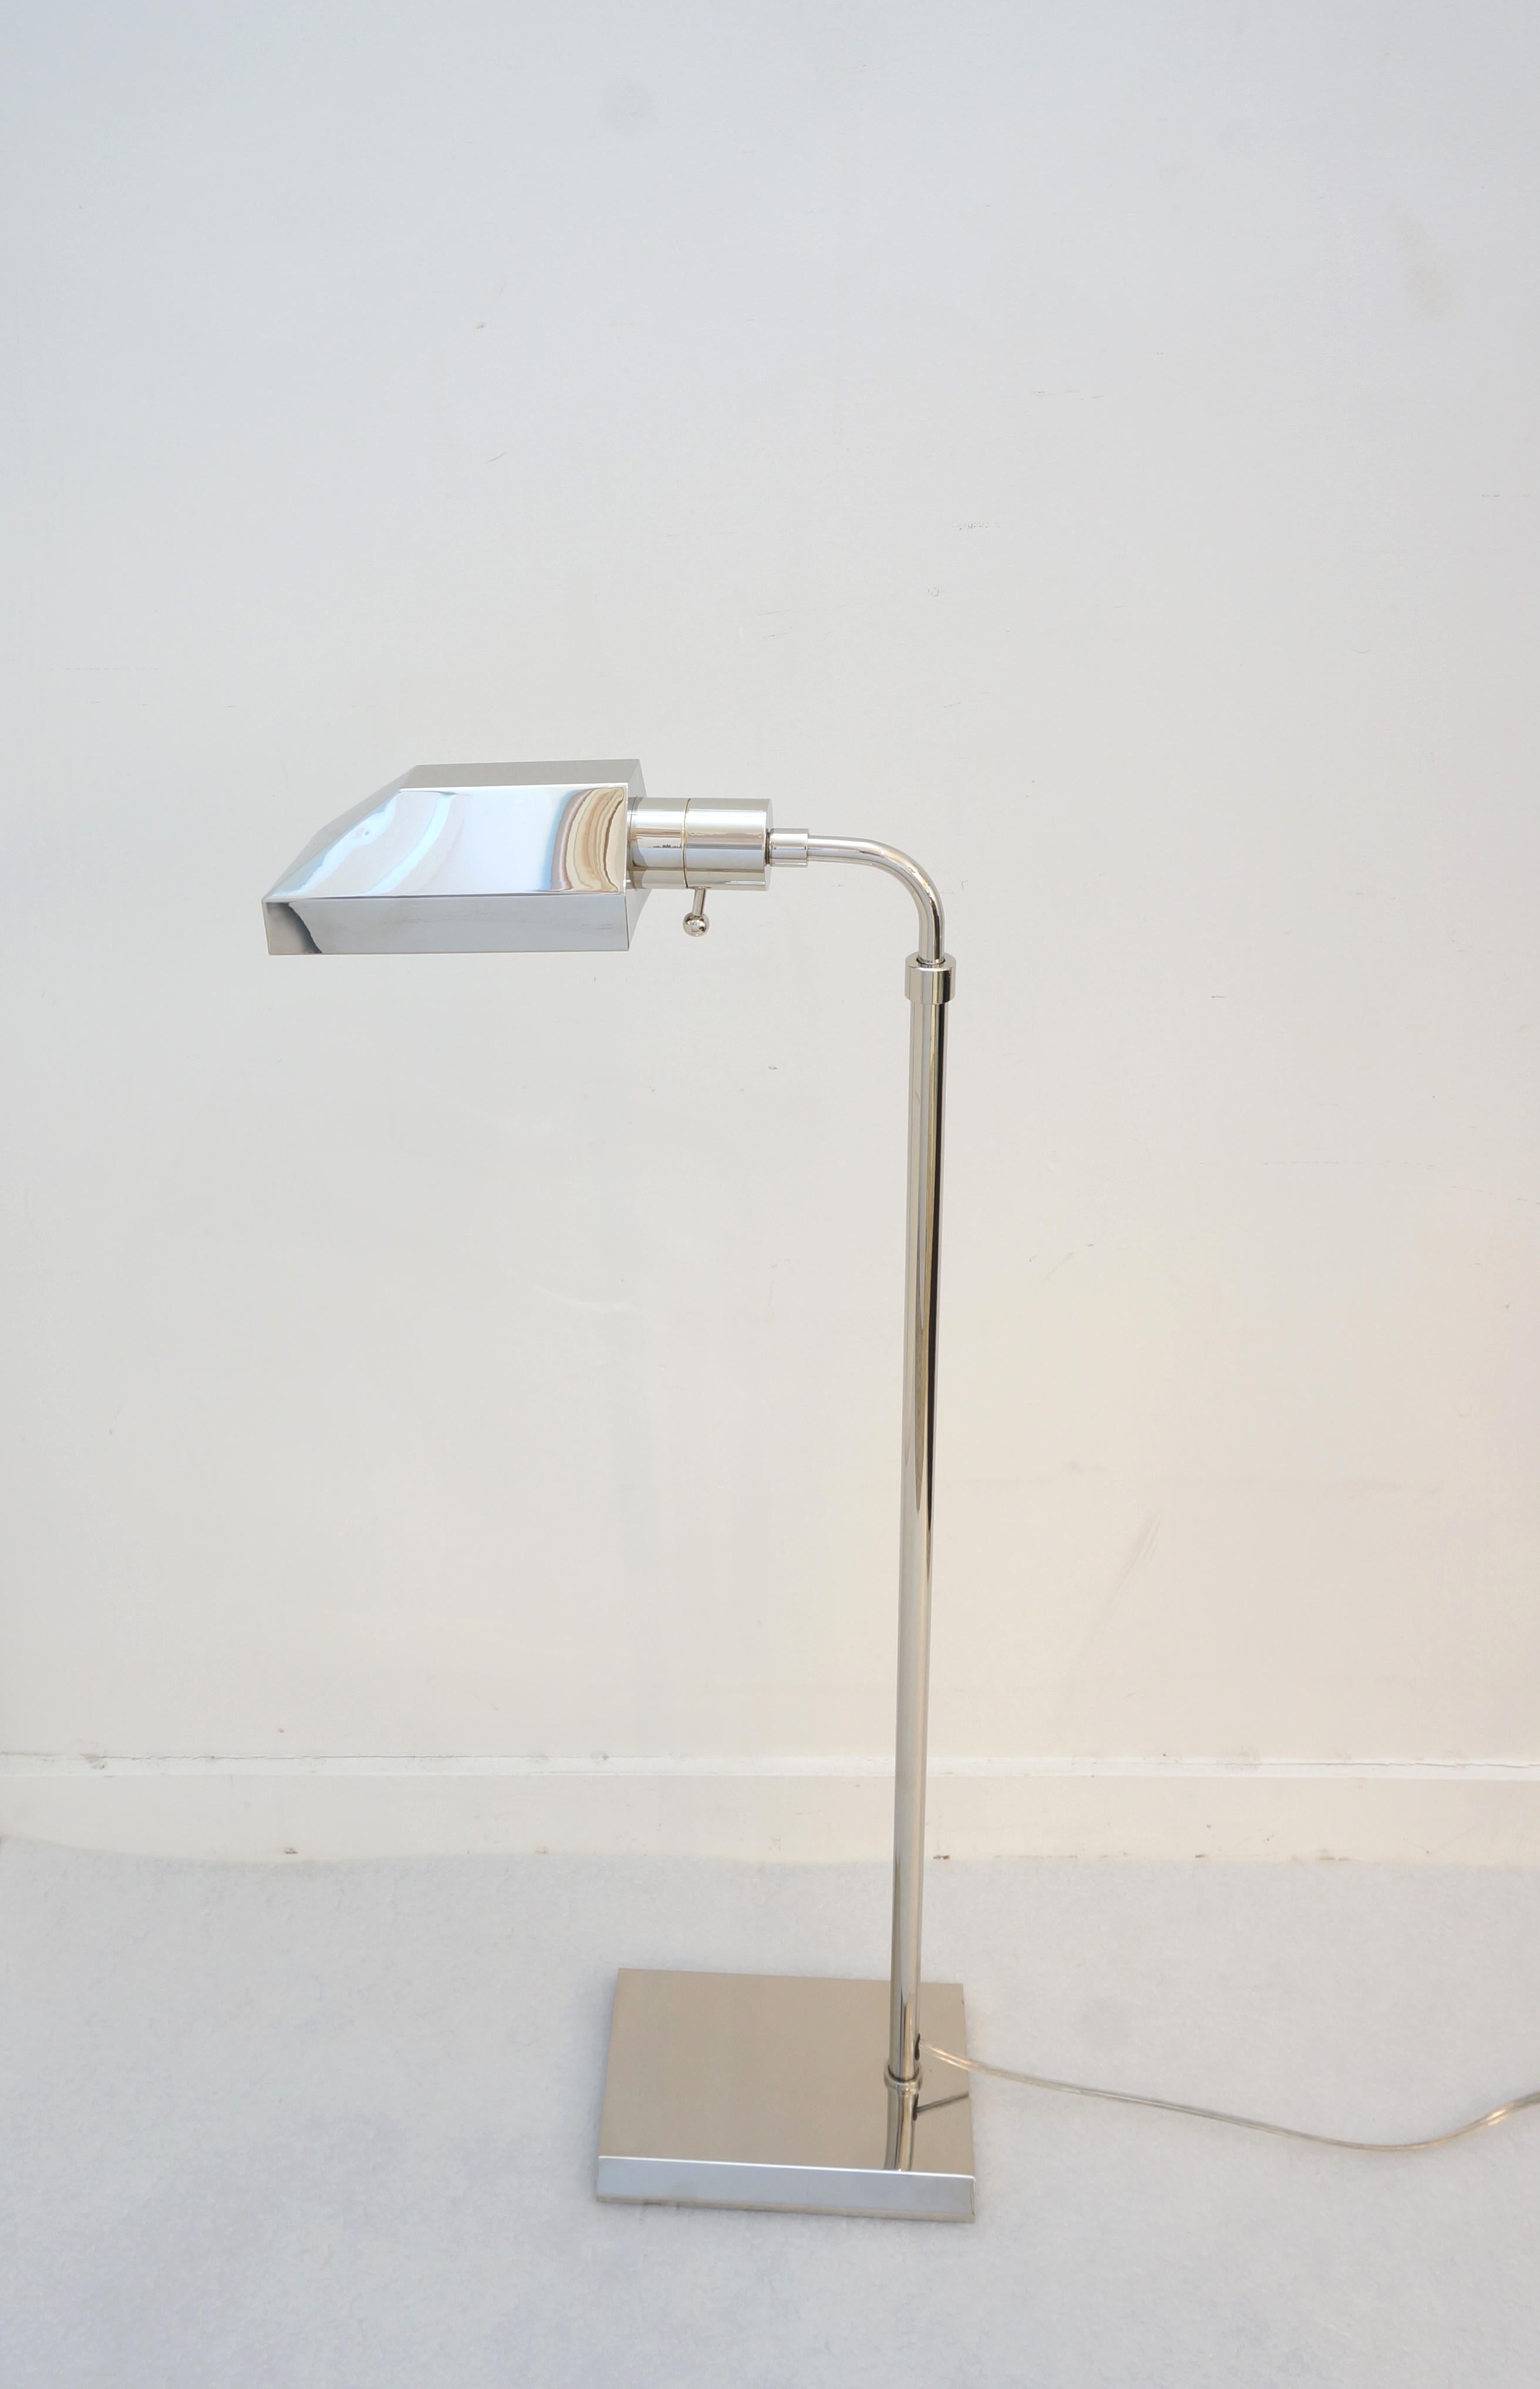 Nickel Plated Cedric Hartman Floor Lamp In Good Condition For Sale In West Palm Beach, FL